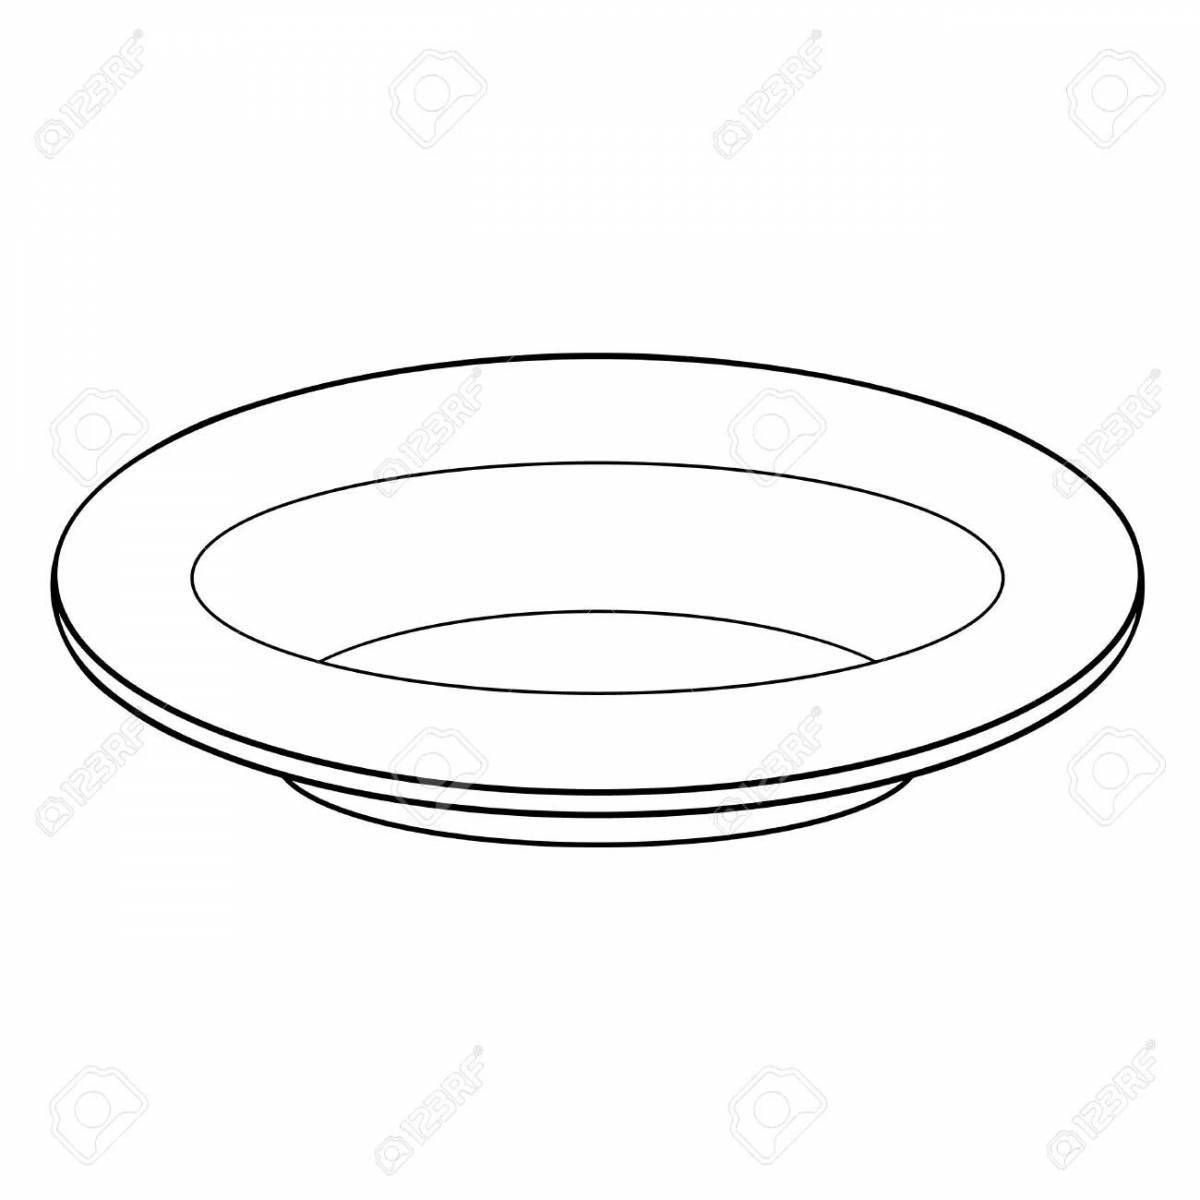 Attractive plate pattern